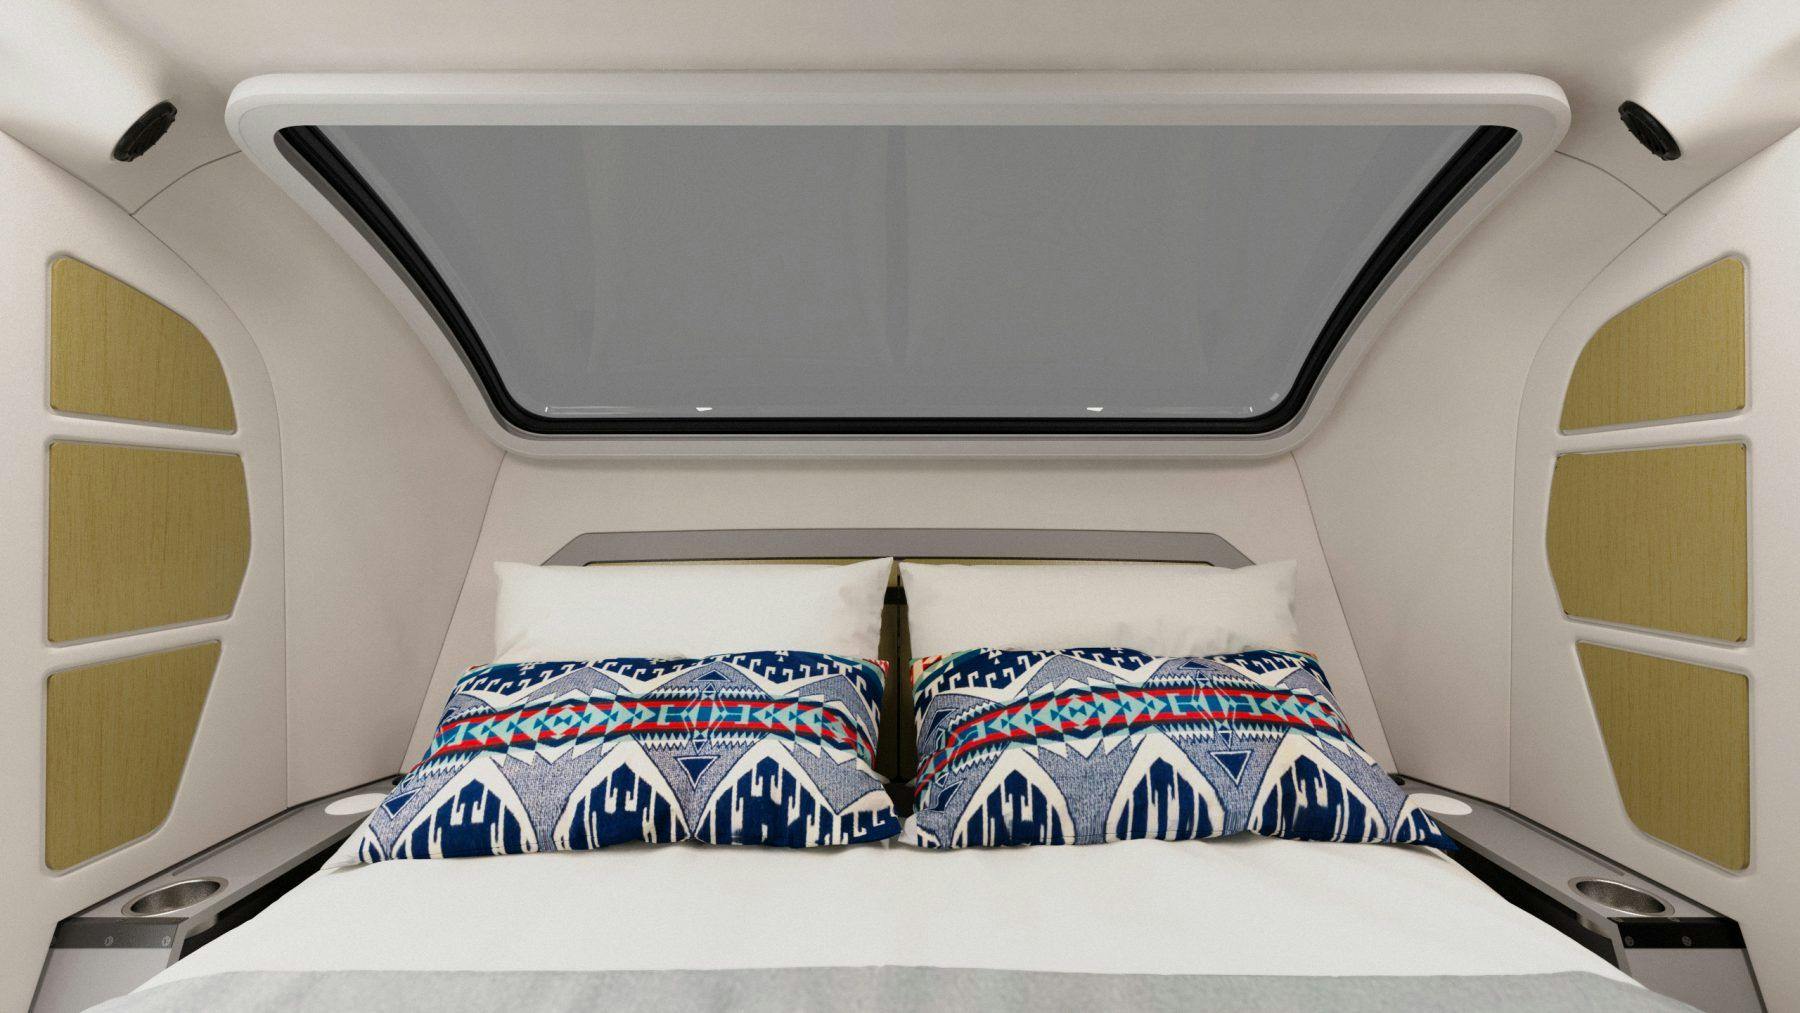 Rendering of the interior of the TOPO2 displaying a queen sized bed, headboard storage, a stargazer window, and nightstands.